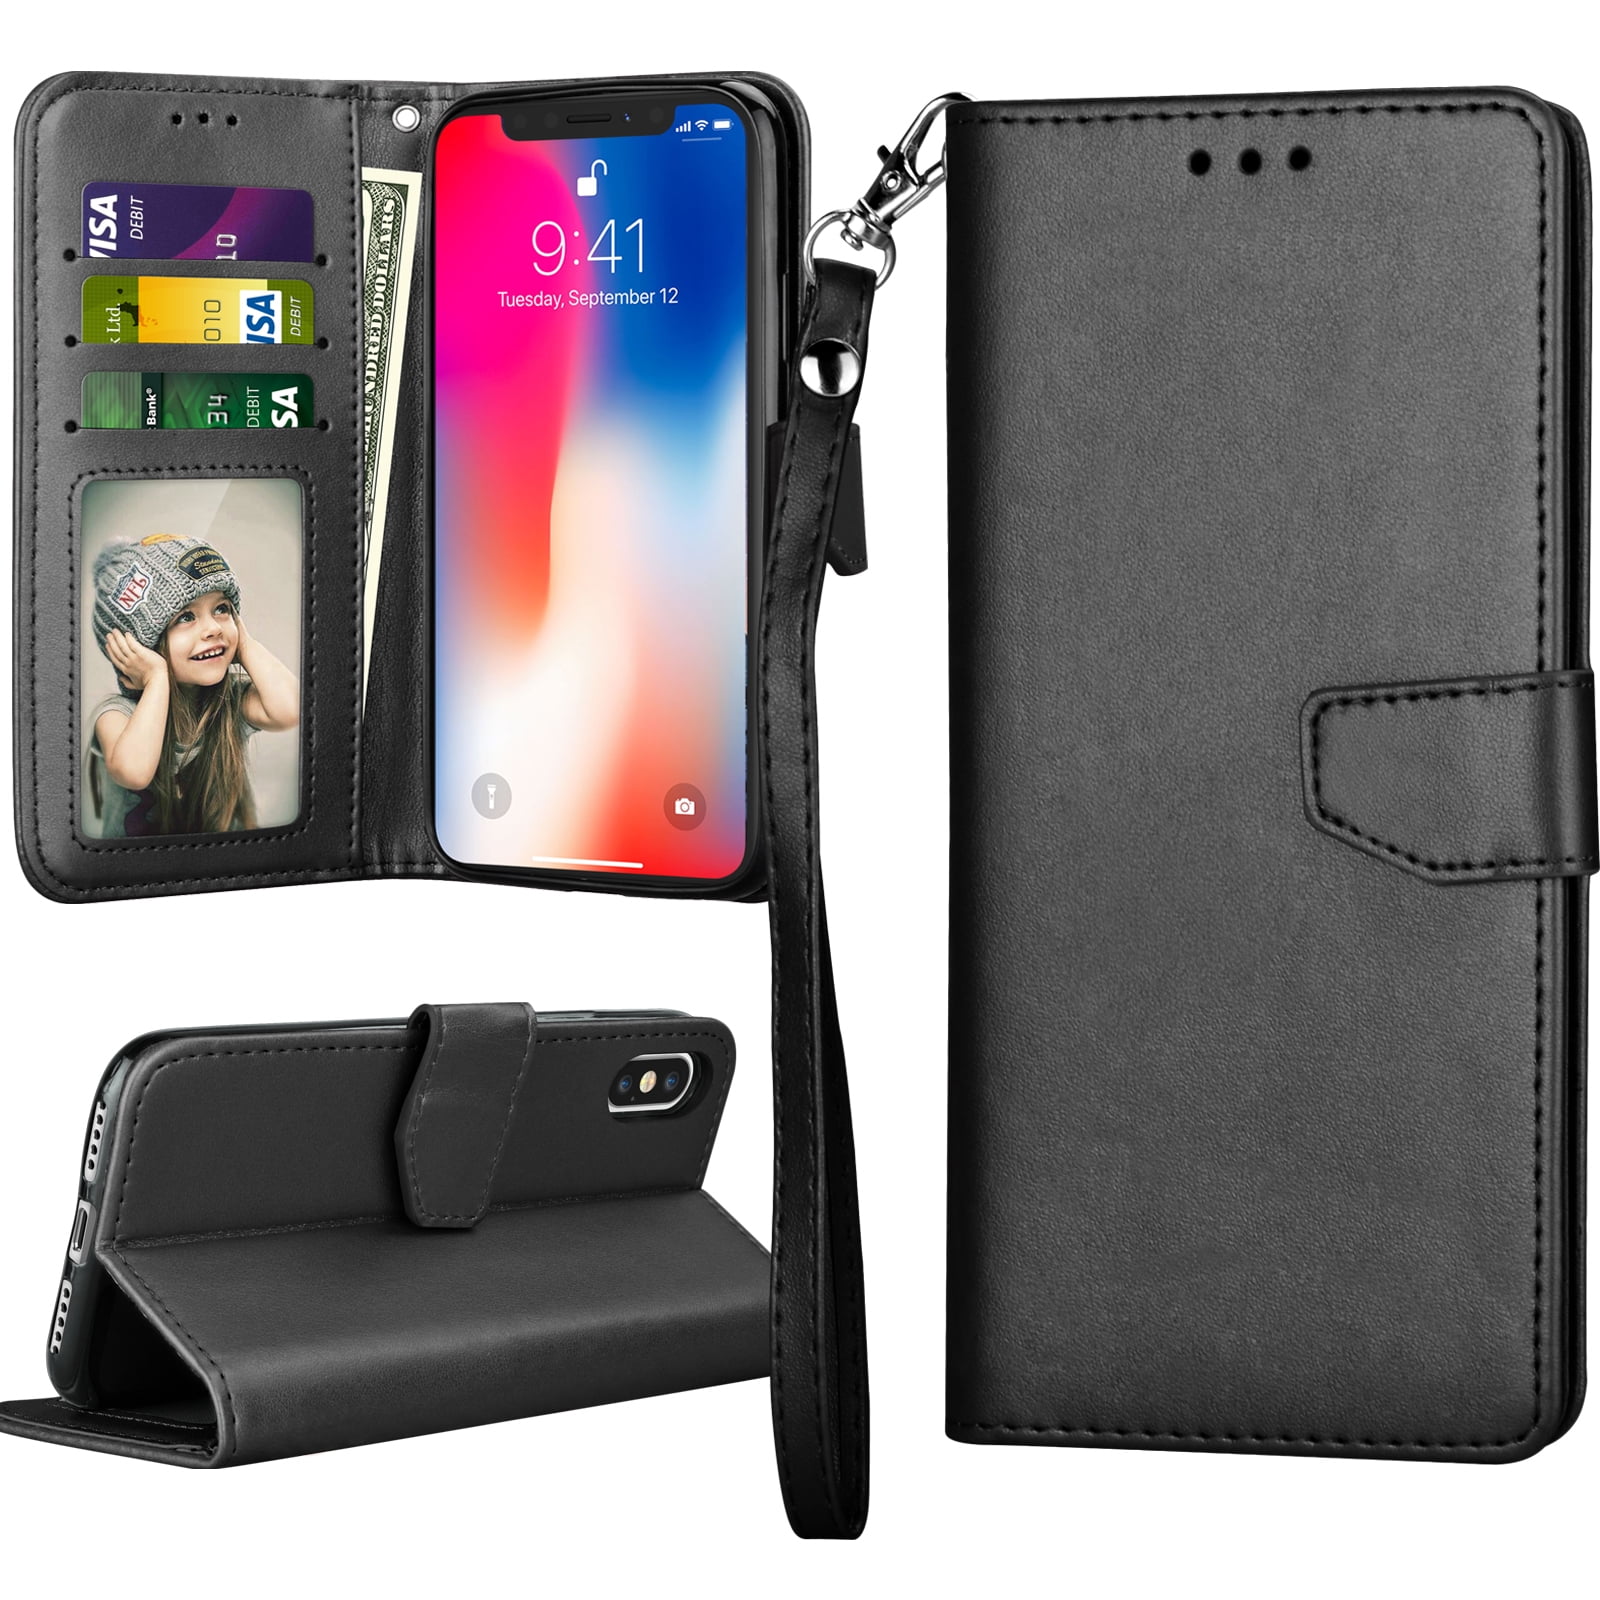 Relief Design Bookstyle Leather Wallet Holster Kickstand Function Full Body Protection Bumper Magnetic Closure Flip Cover with Wrist Lanyard and Screen Protector For iphone X Case with Card Slot,OYIME Colorful Painting Pattern Marble Mandala